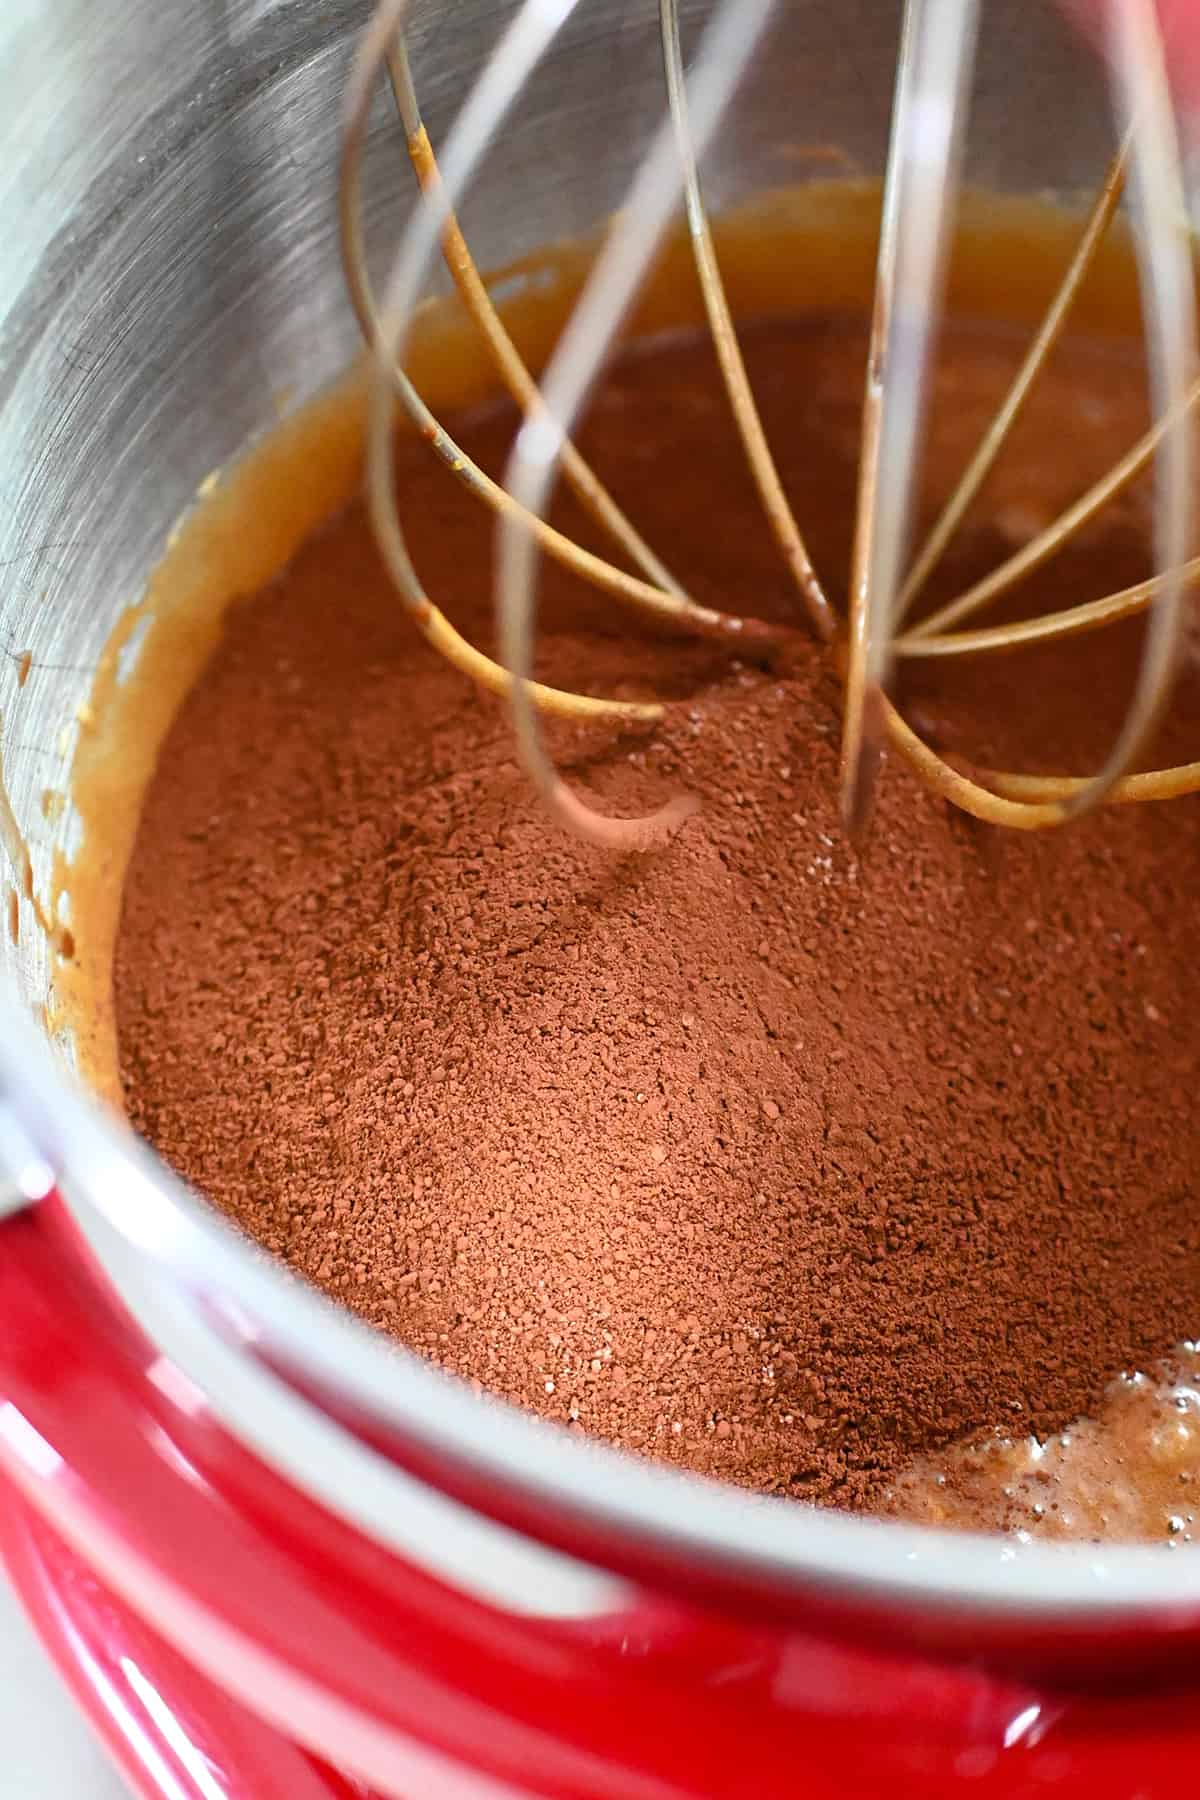 The sifted almond flour and unsweetened cocoa powder is added to the bowl of stand mixer with paleo brownie batter.